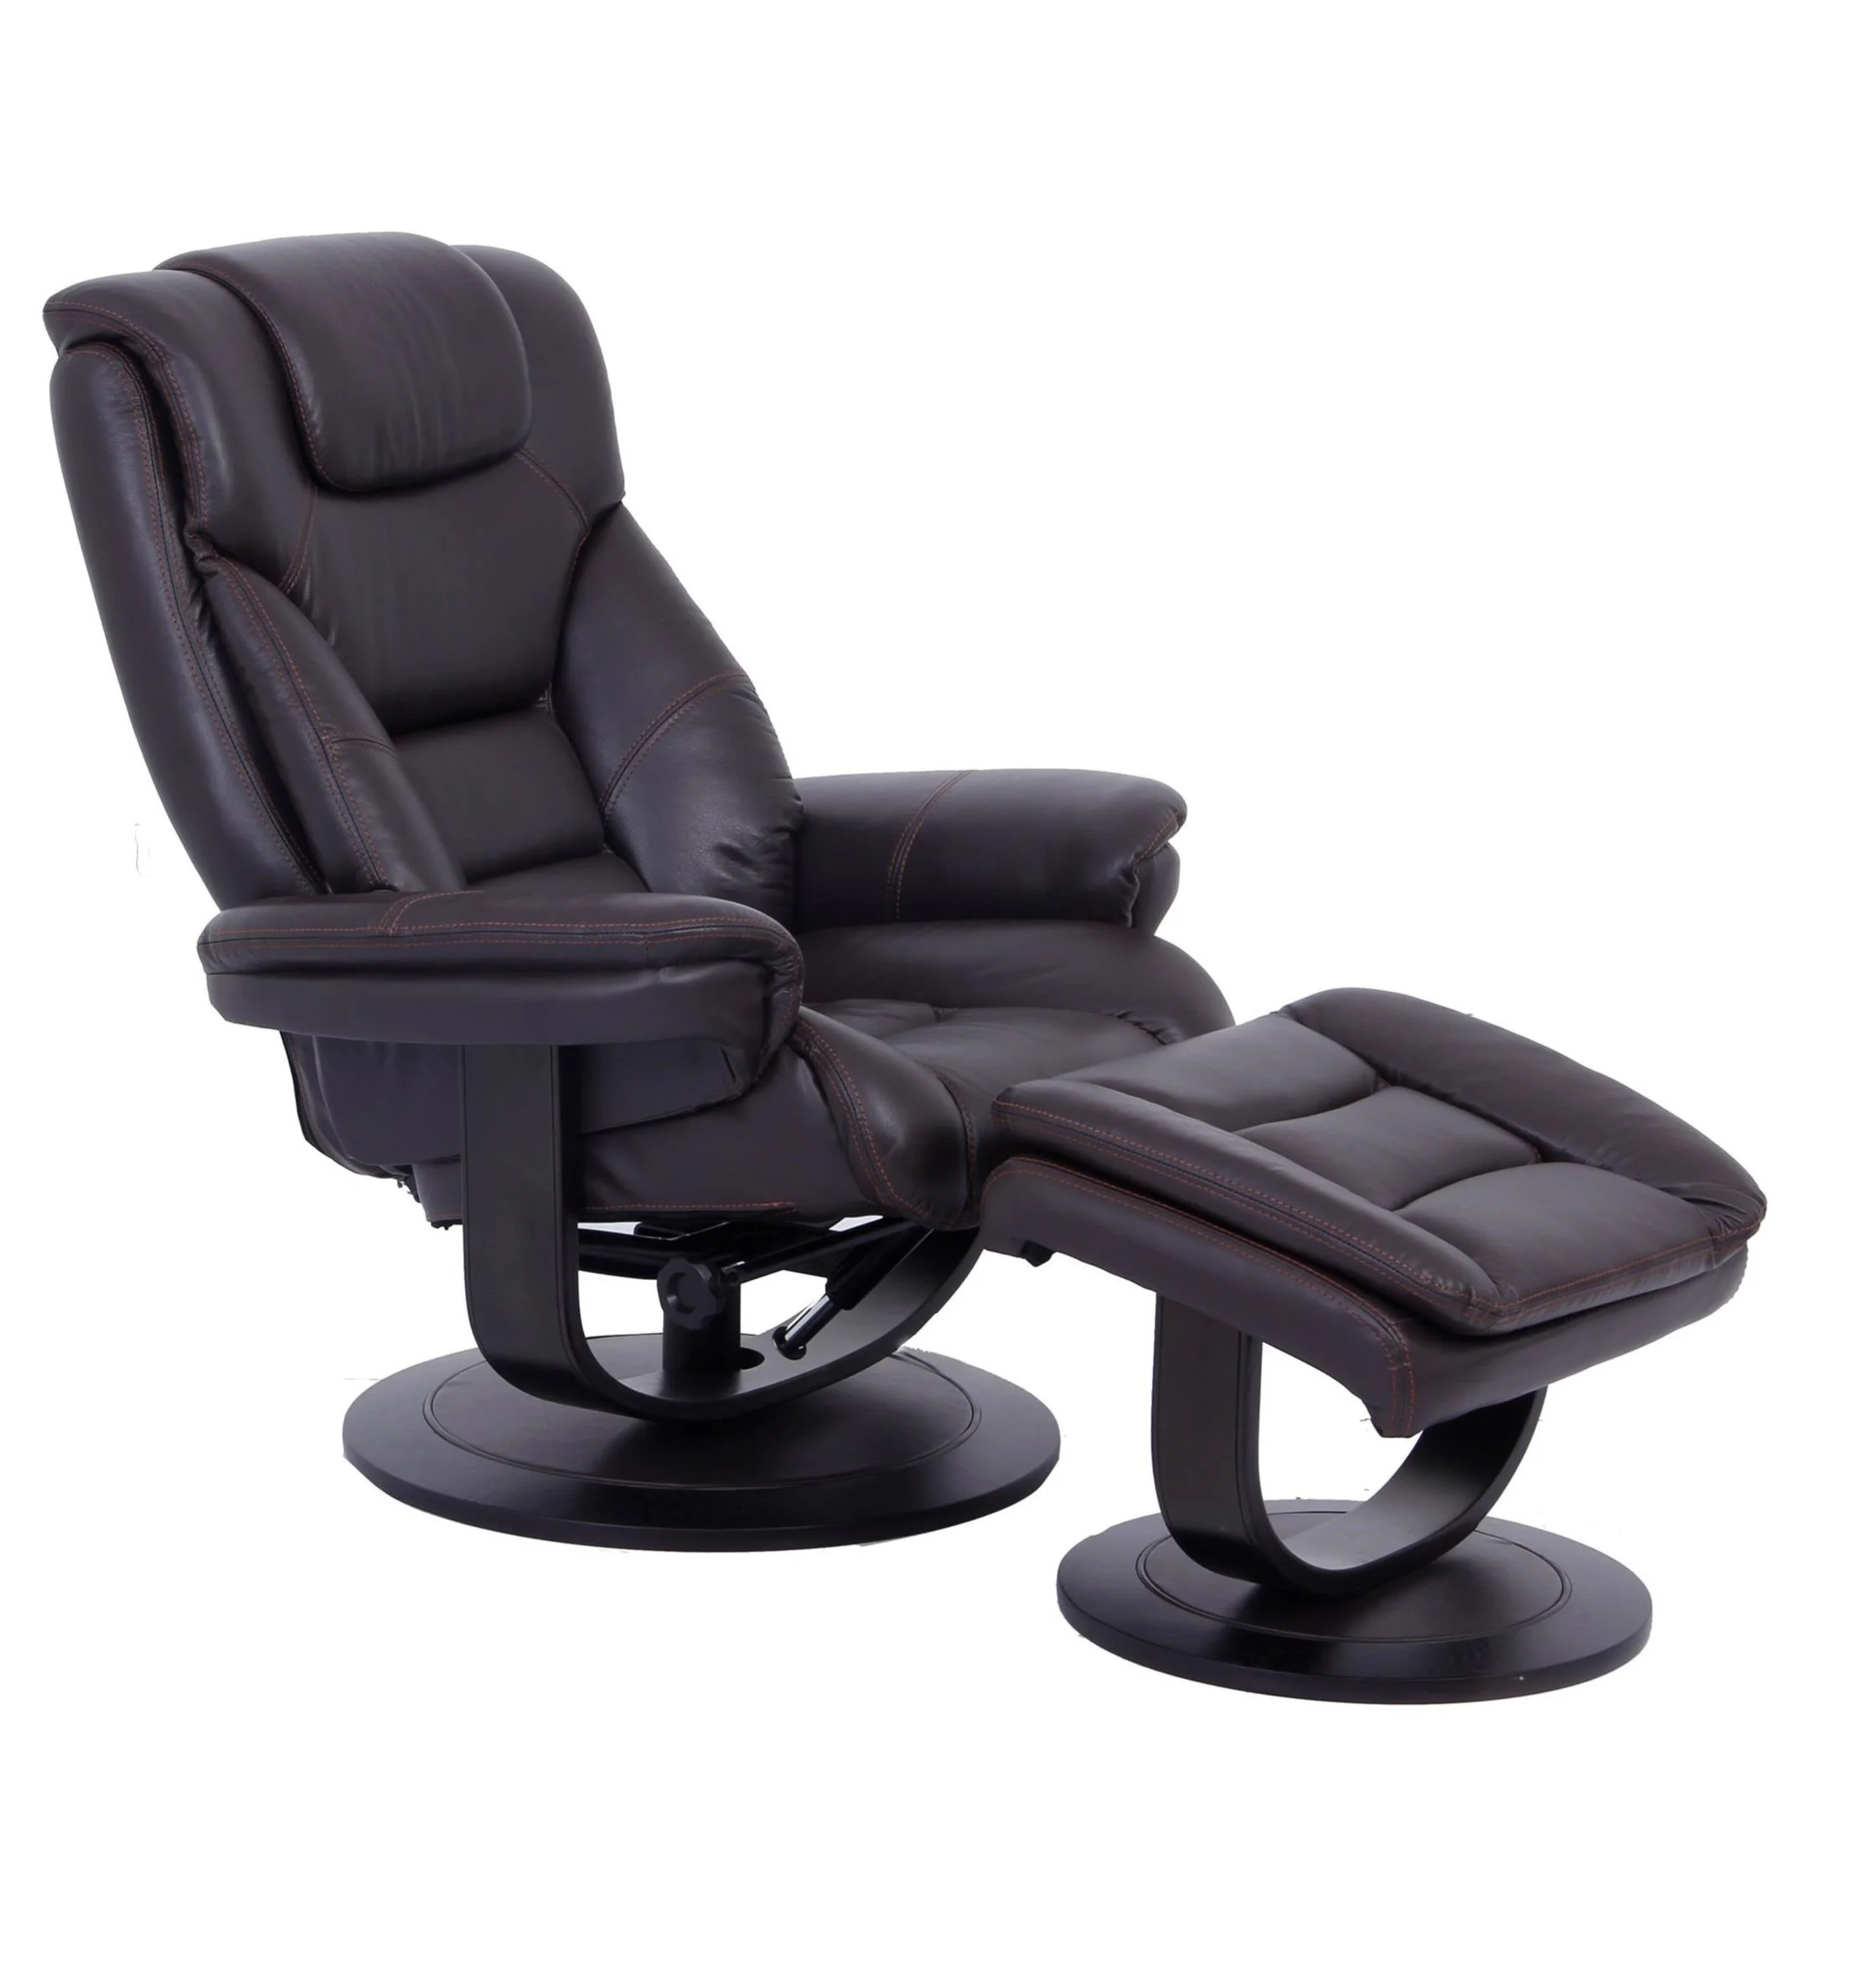 Recliner Accessories Factory - China Recliner Accessories Manufacturers,  Suppliers